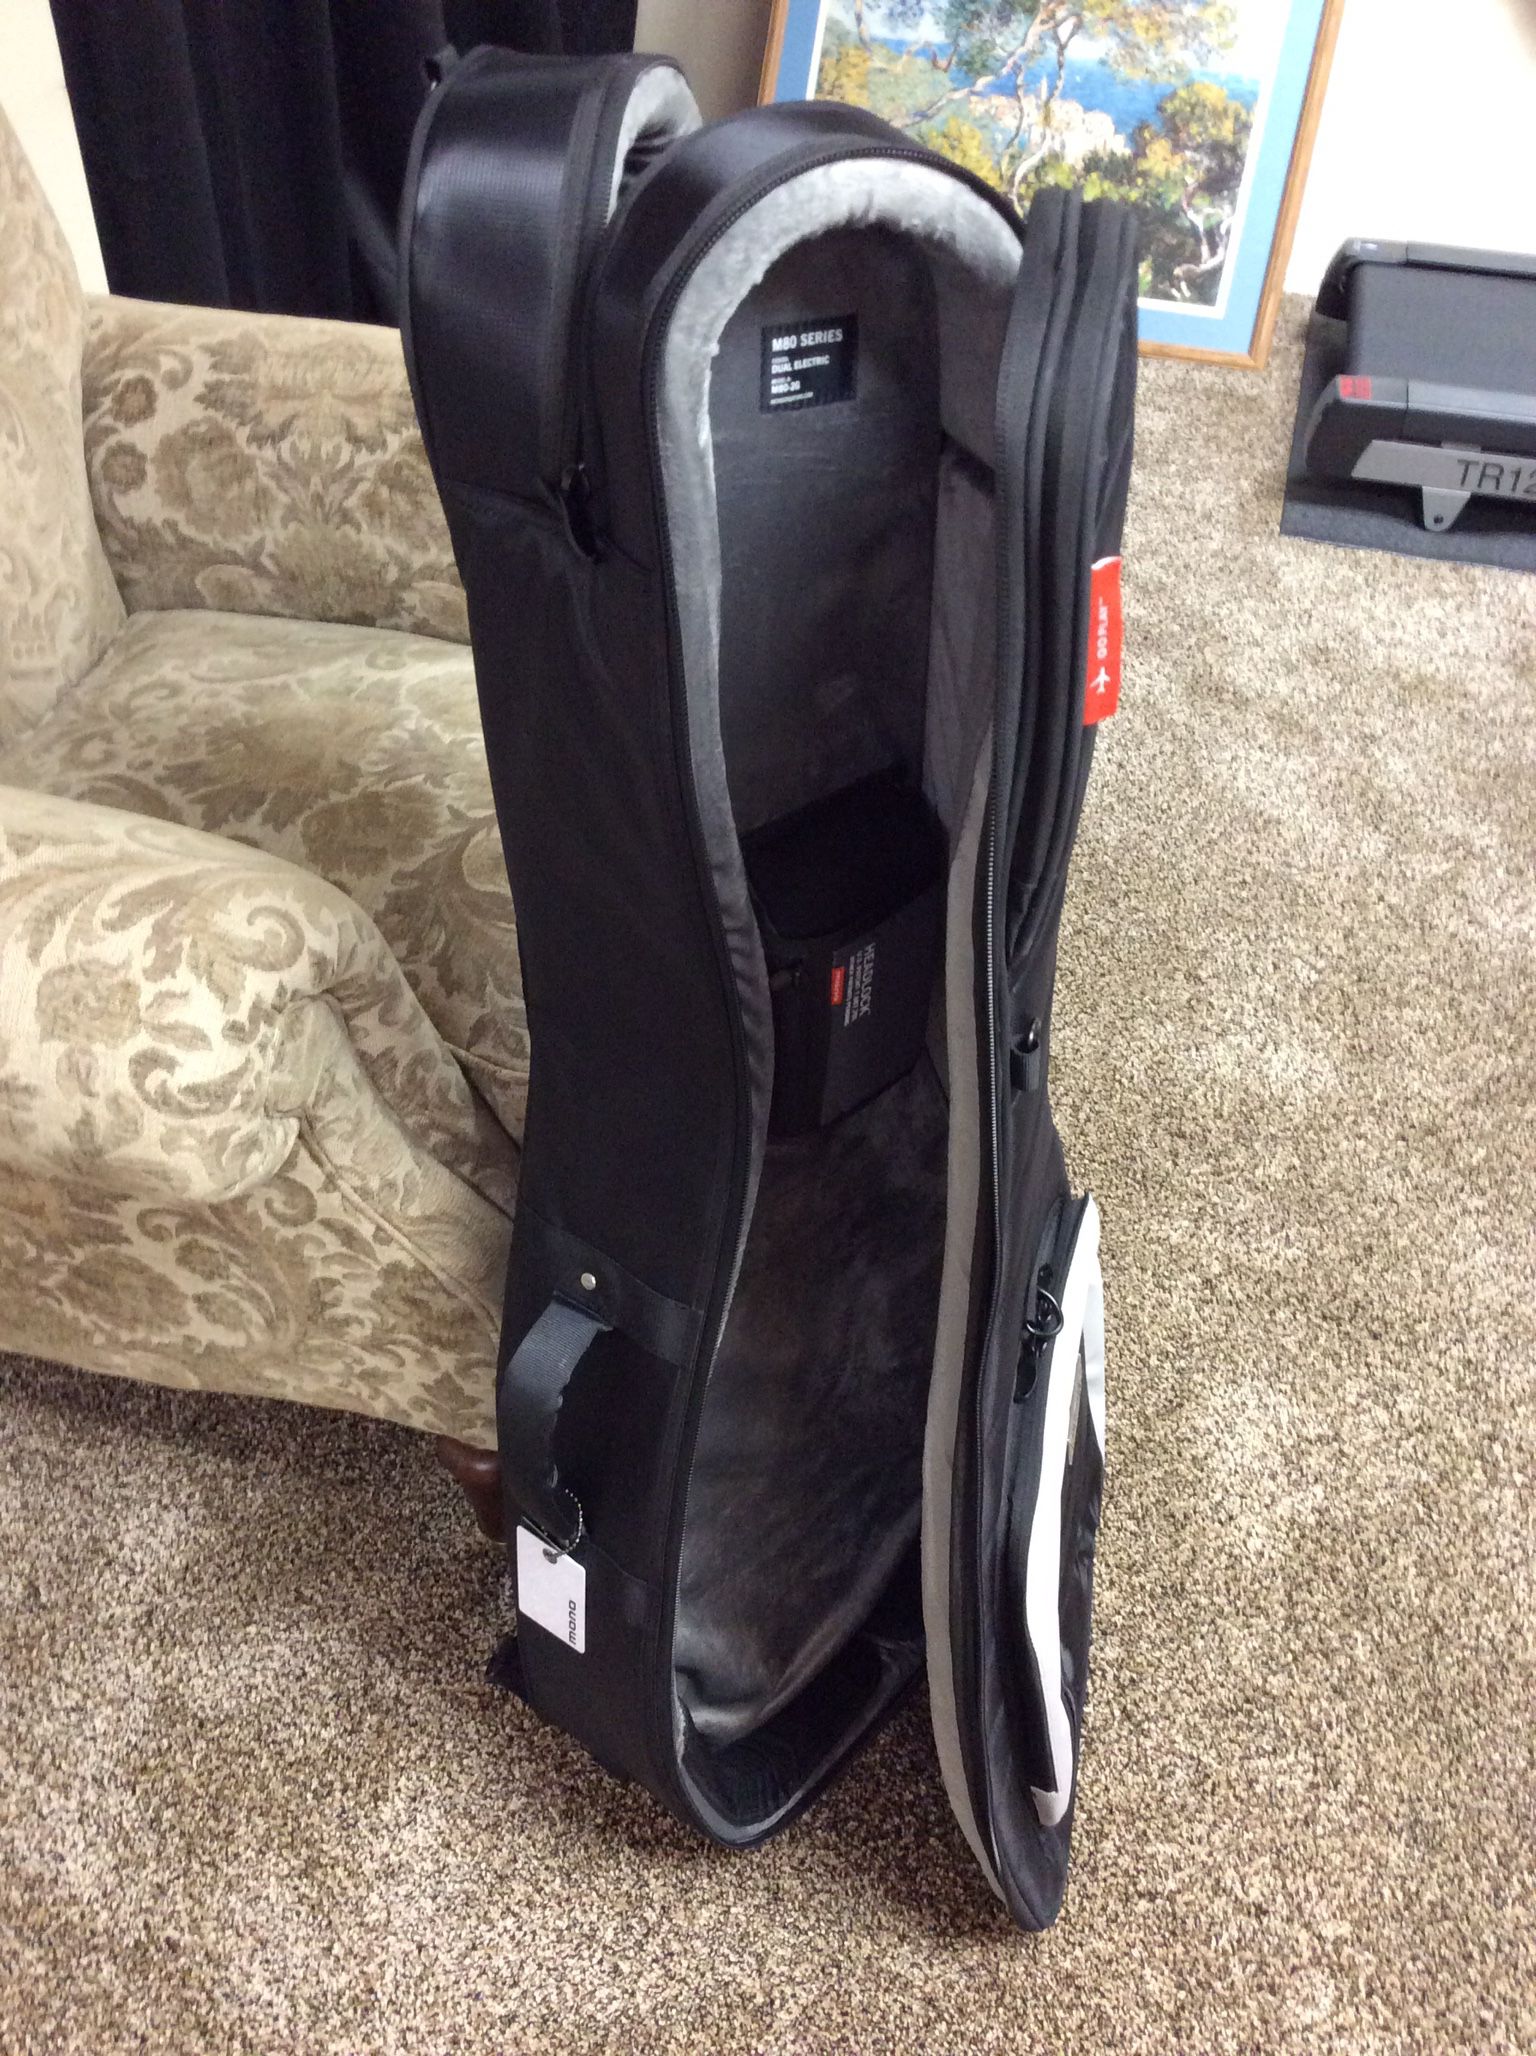 Monobag Dual Guitar - new in box - It’s Available Please Don’t Ask